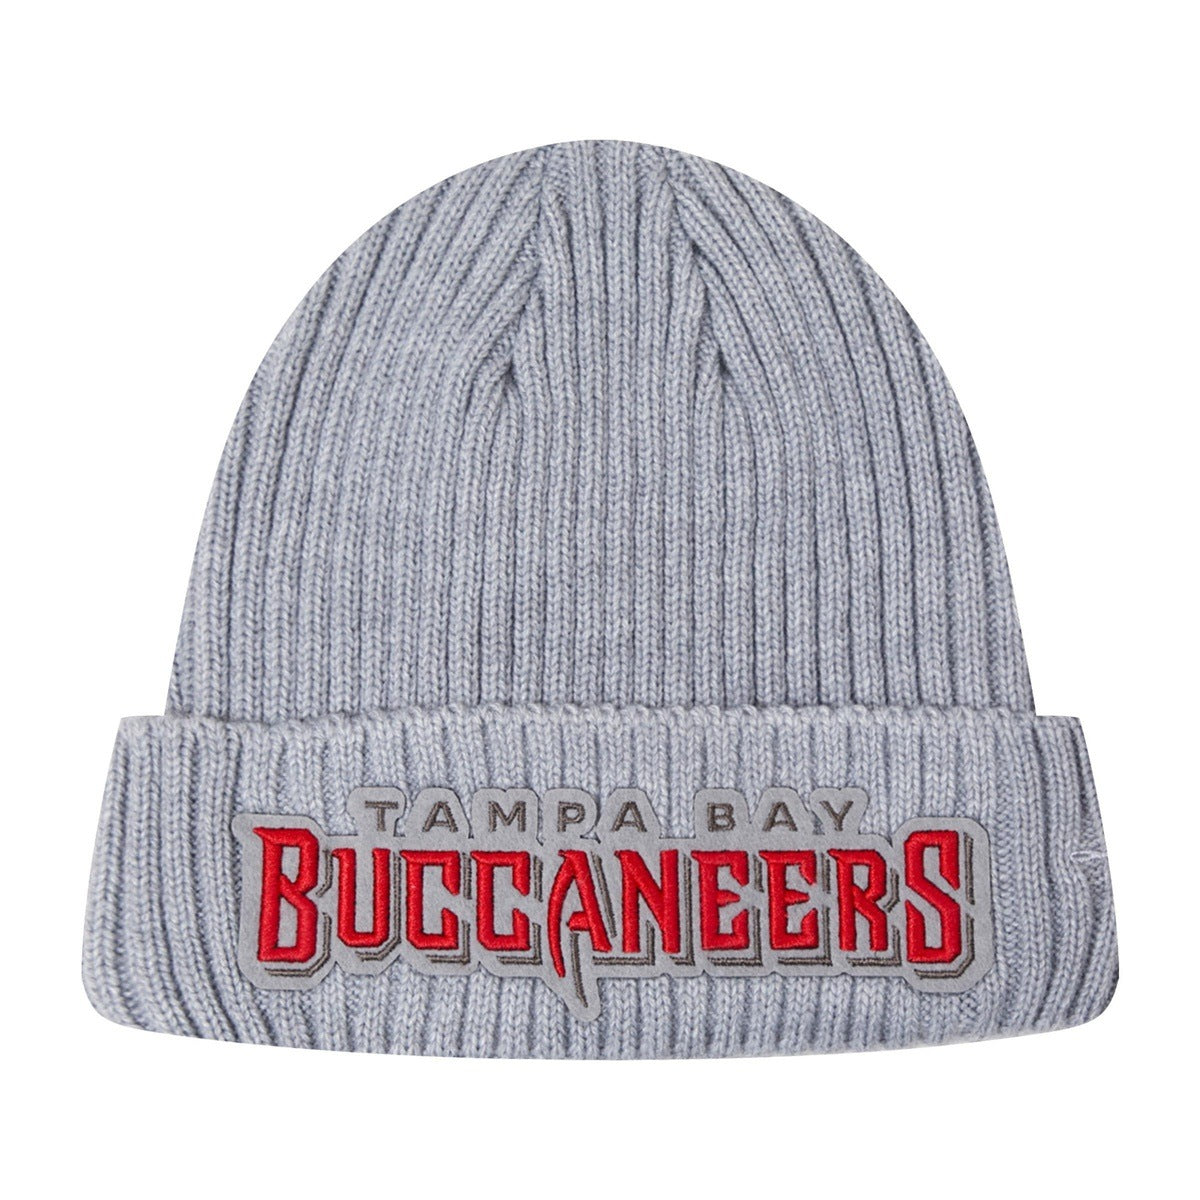 TAMPA BAY BUCCANEERS CLASSIC CORE BEANIE (GRAY)